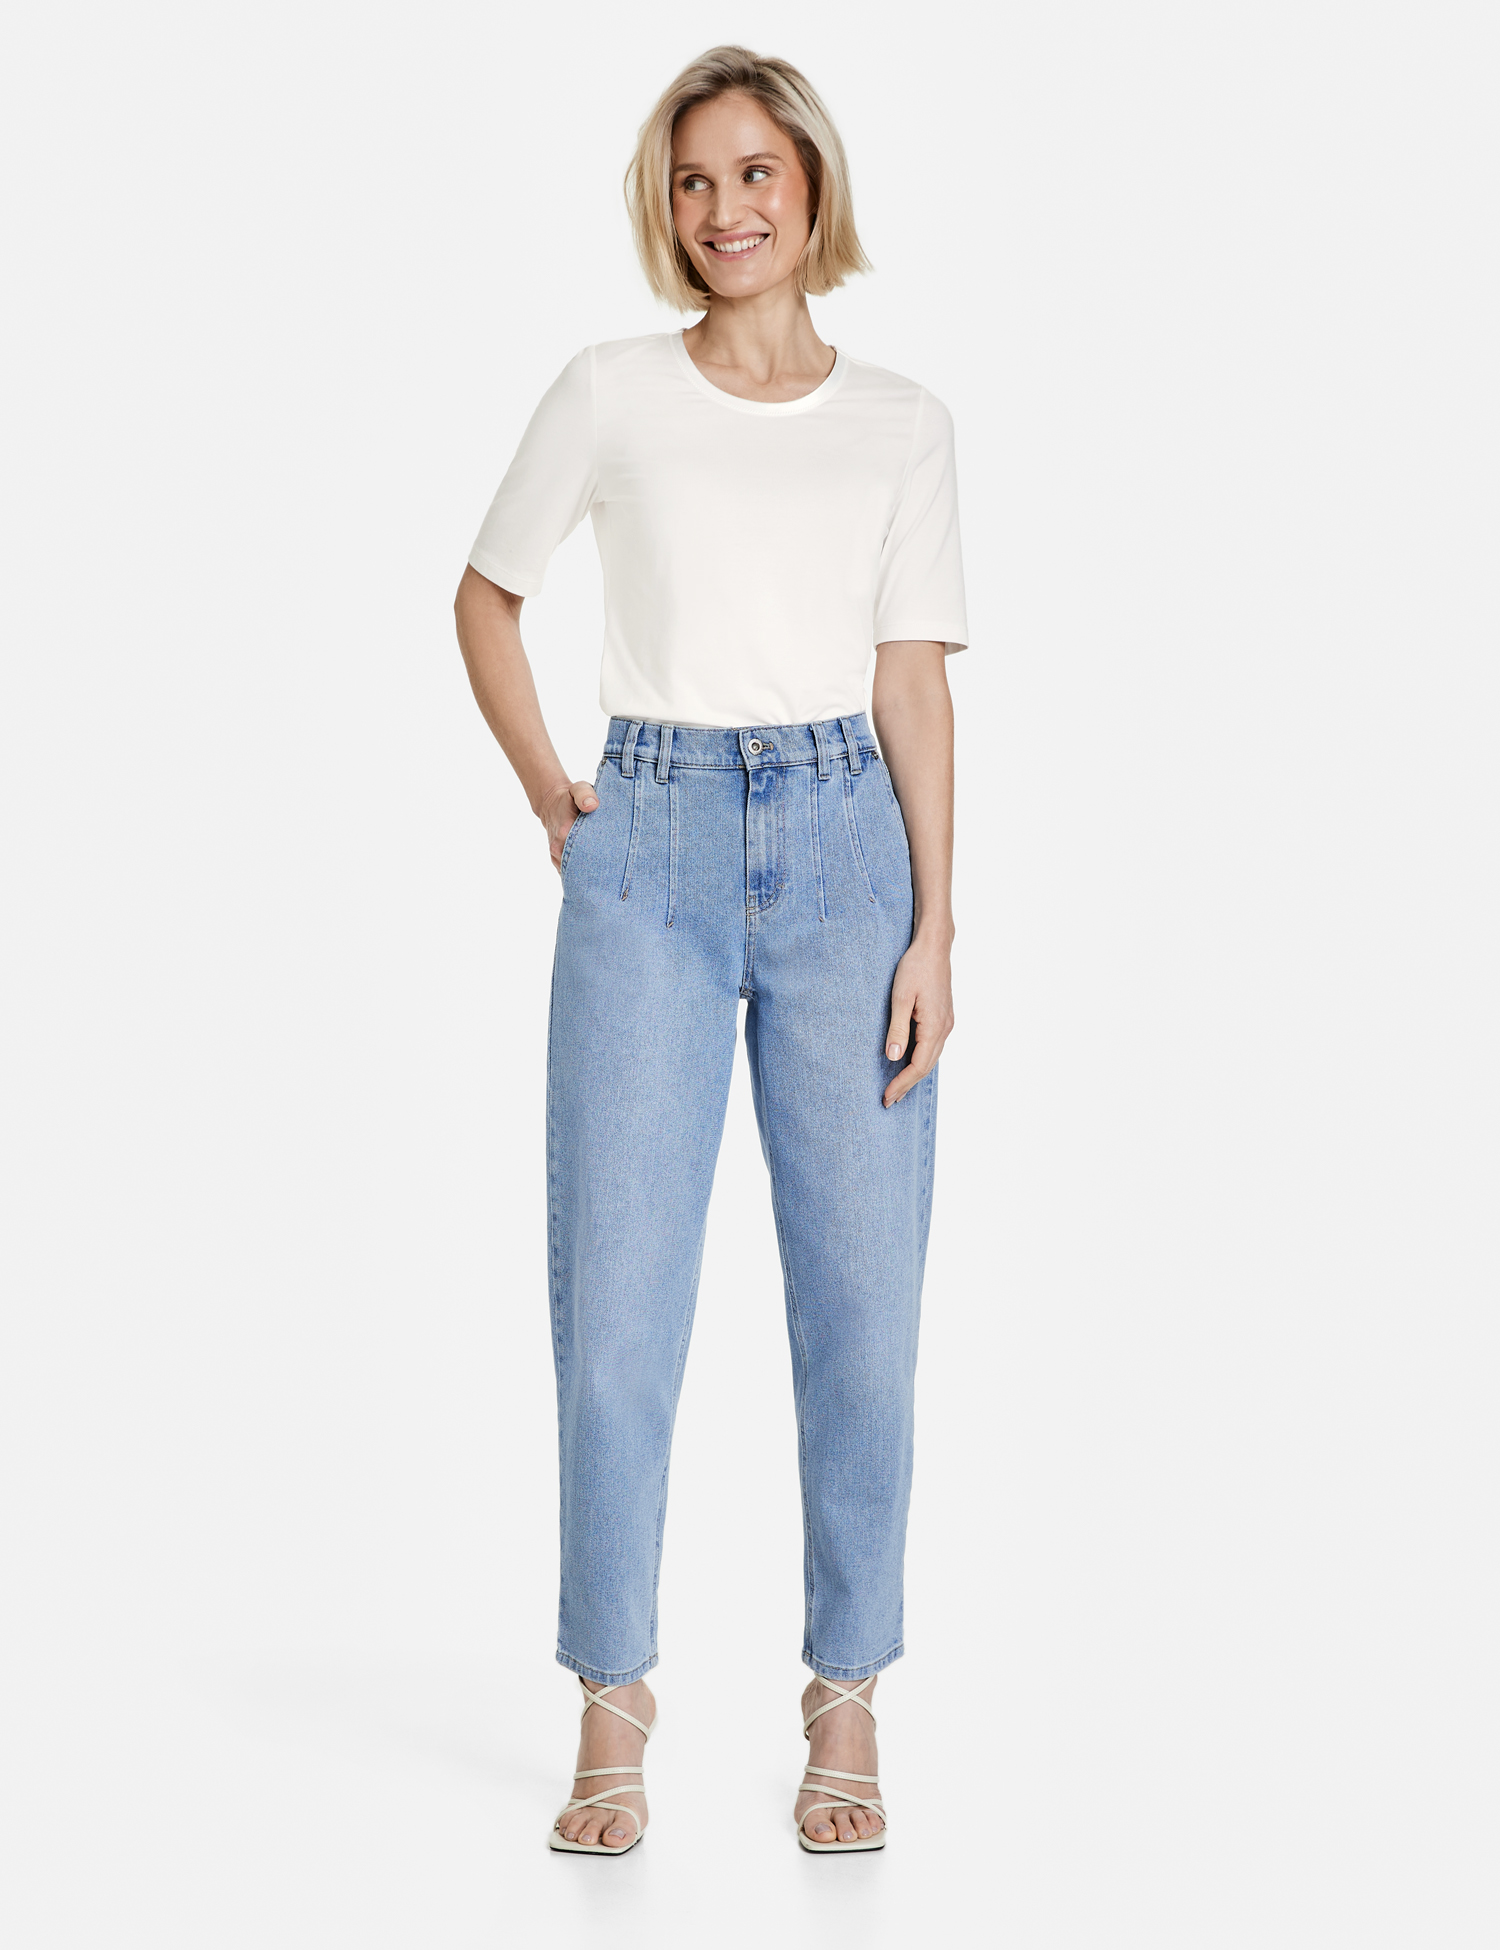 GERRY WEBER BLUE DENIM TROUSERS | Rosella - Style inspired by elegance